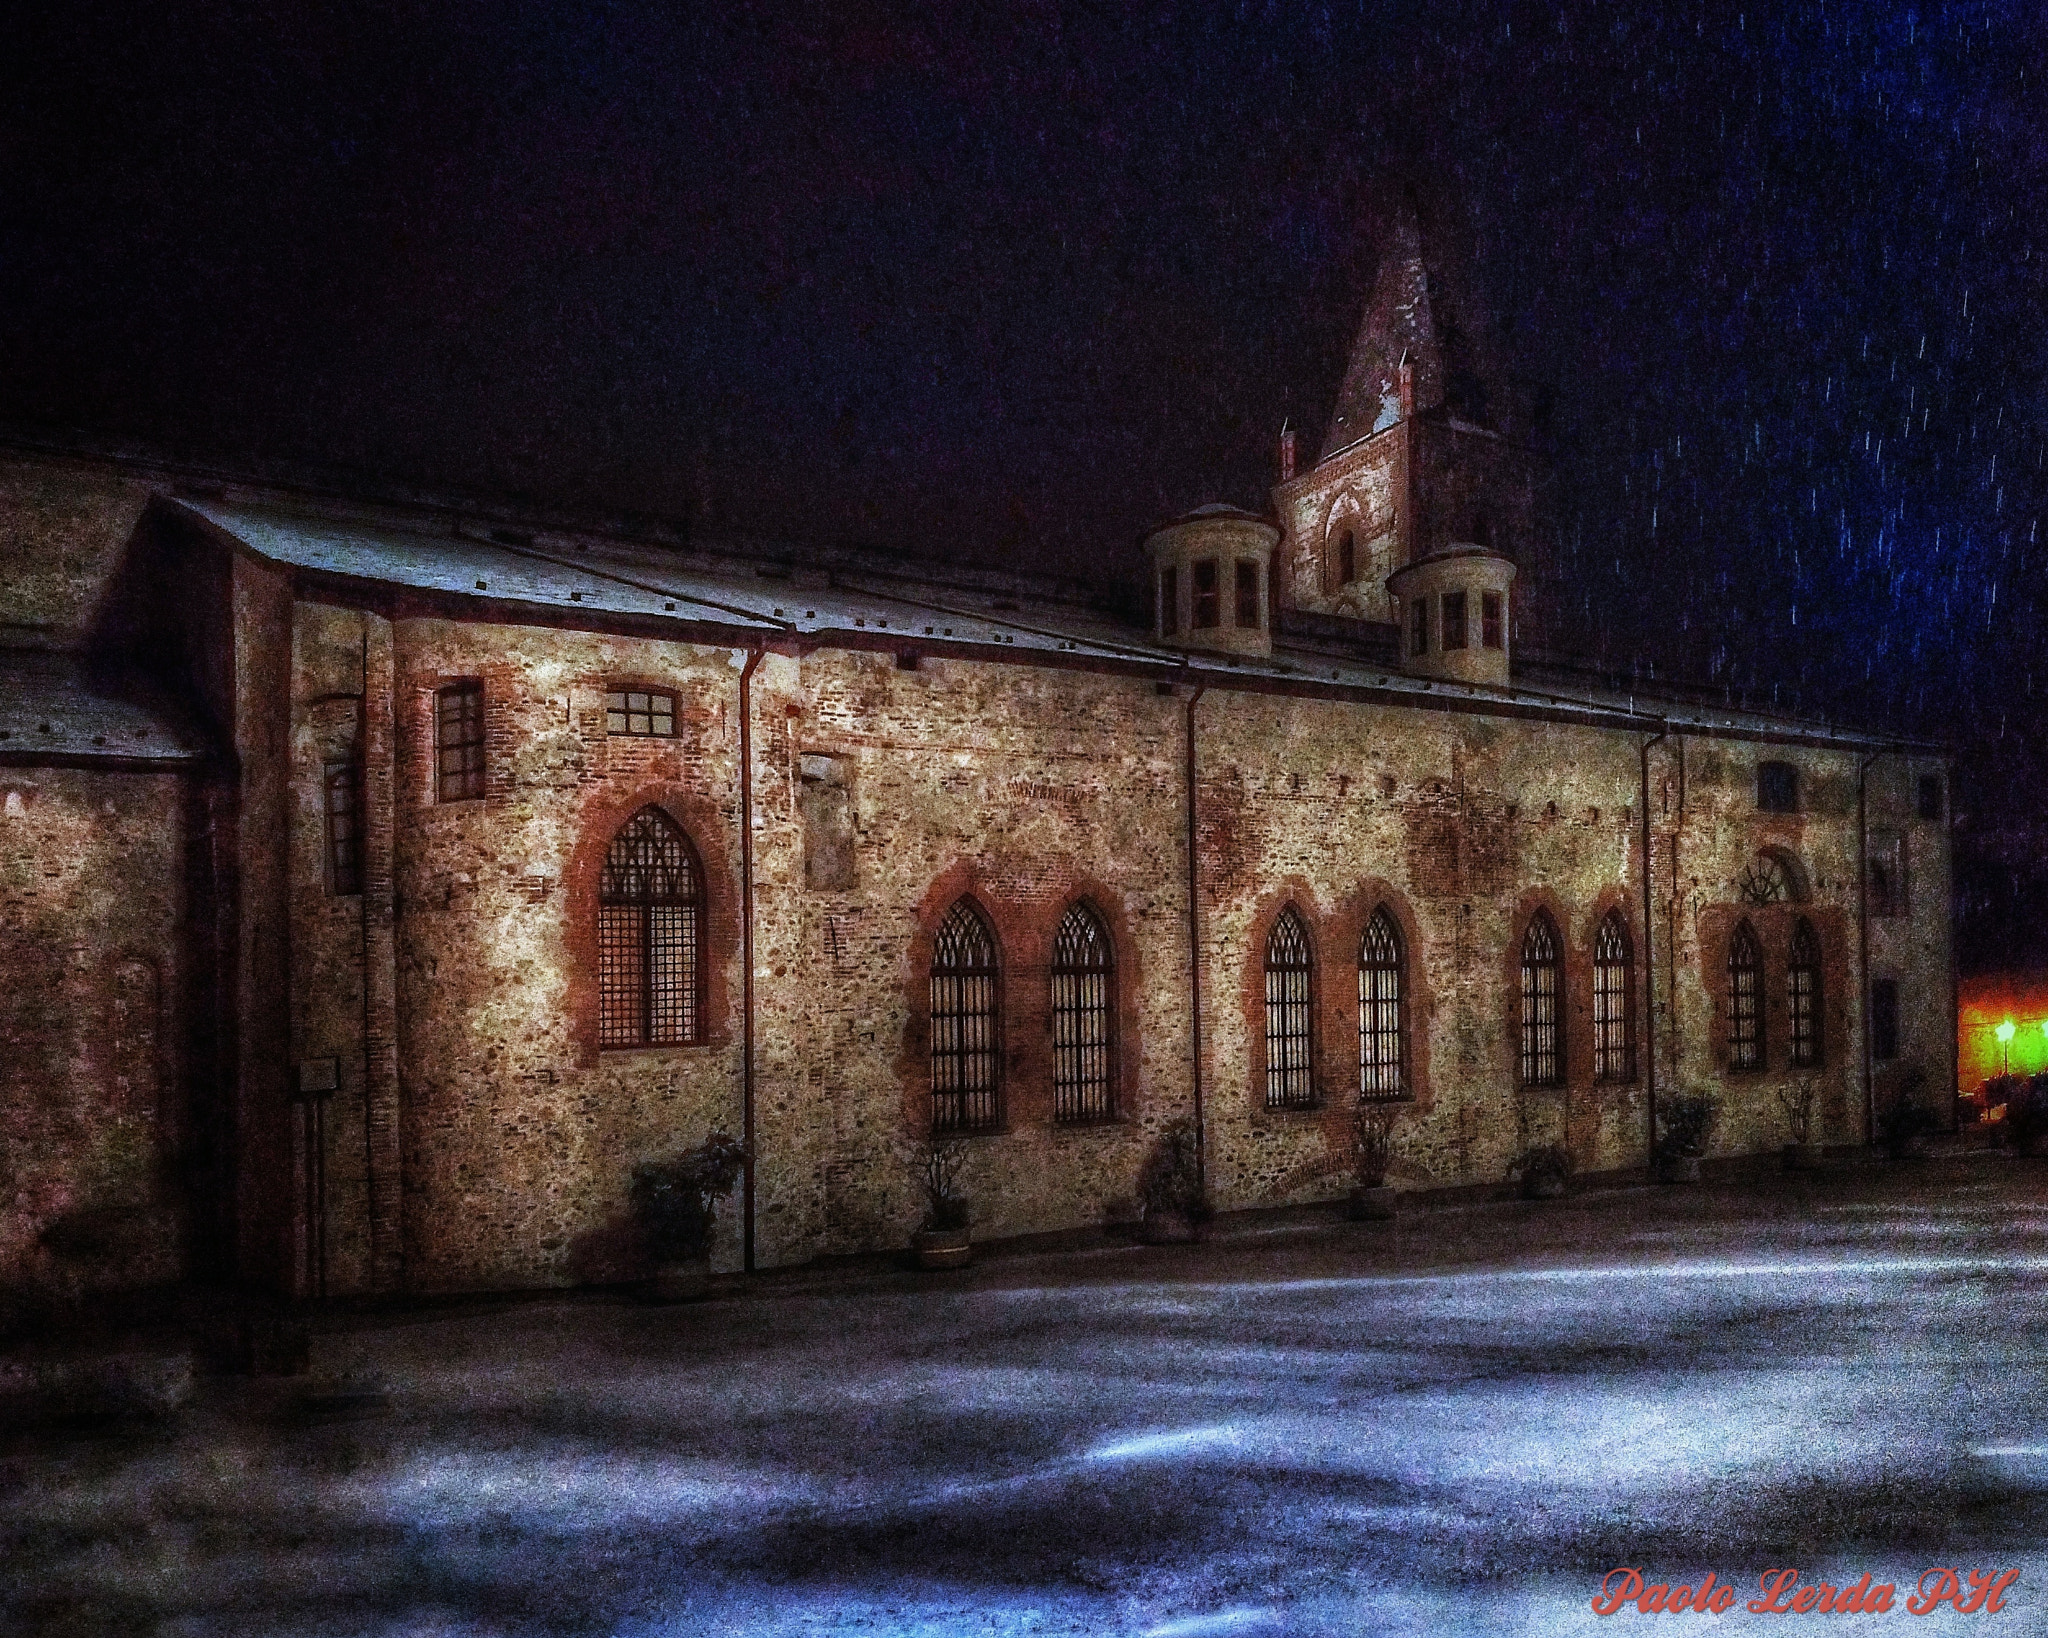 ASUS ZenFone 3 (ZE552KL) sample photo. Church of st. francisco (museum) ....night snowfall....       cuneo italy photography